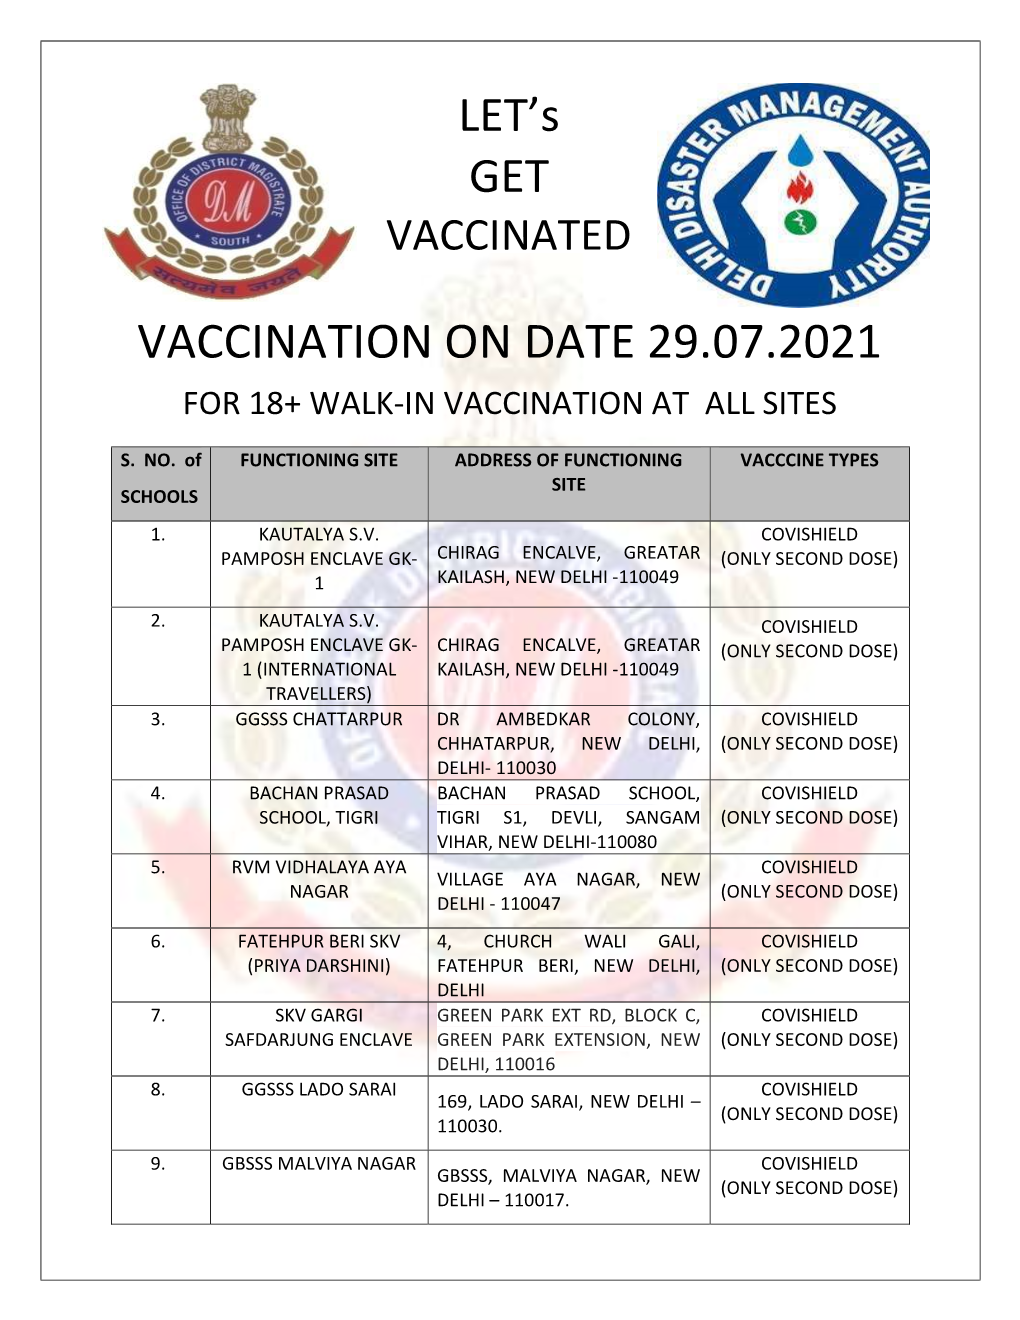 Vaccination on Date 29.07.2021 for 18+ Walk-In Vaccination at All Sites